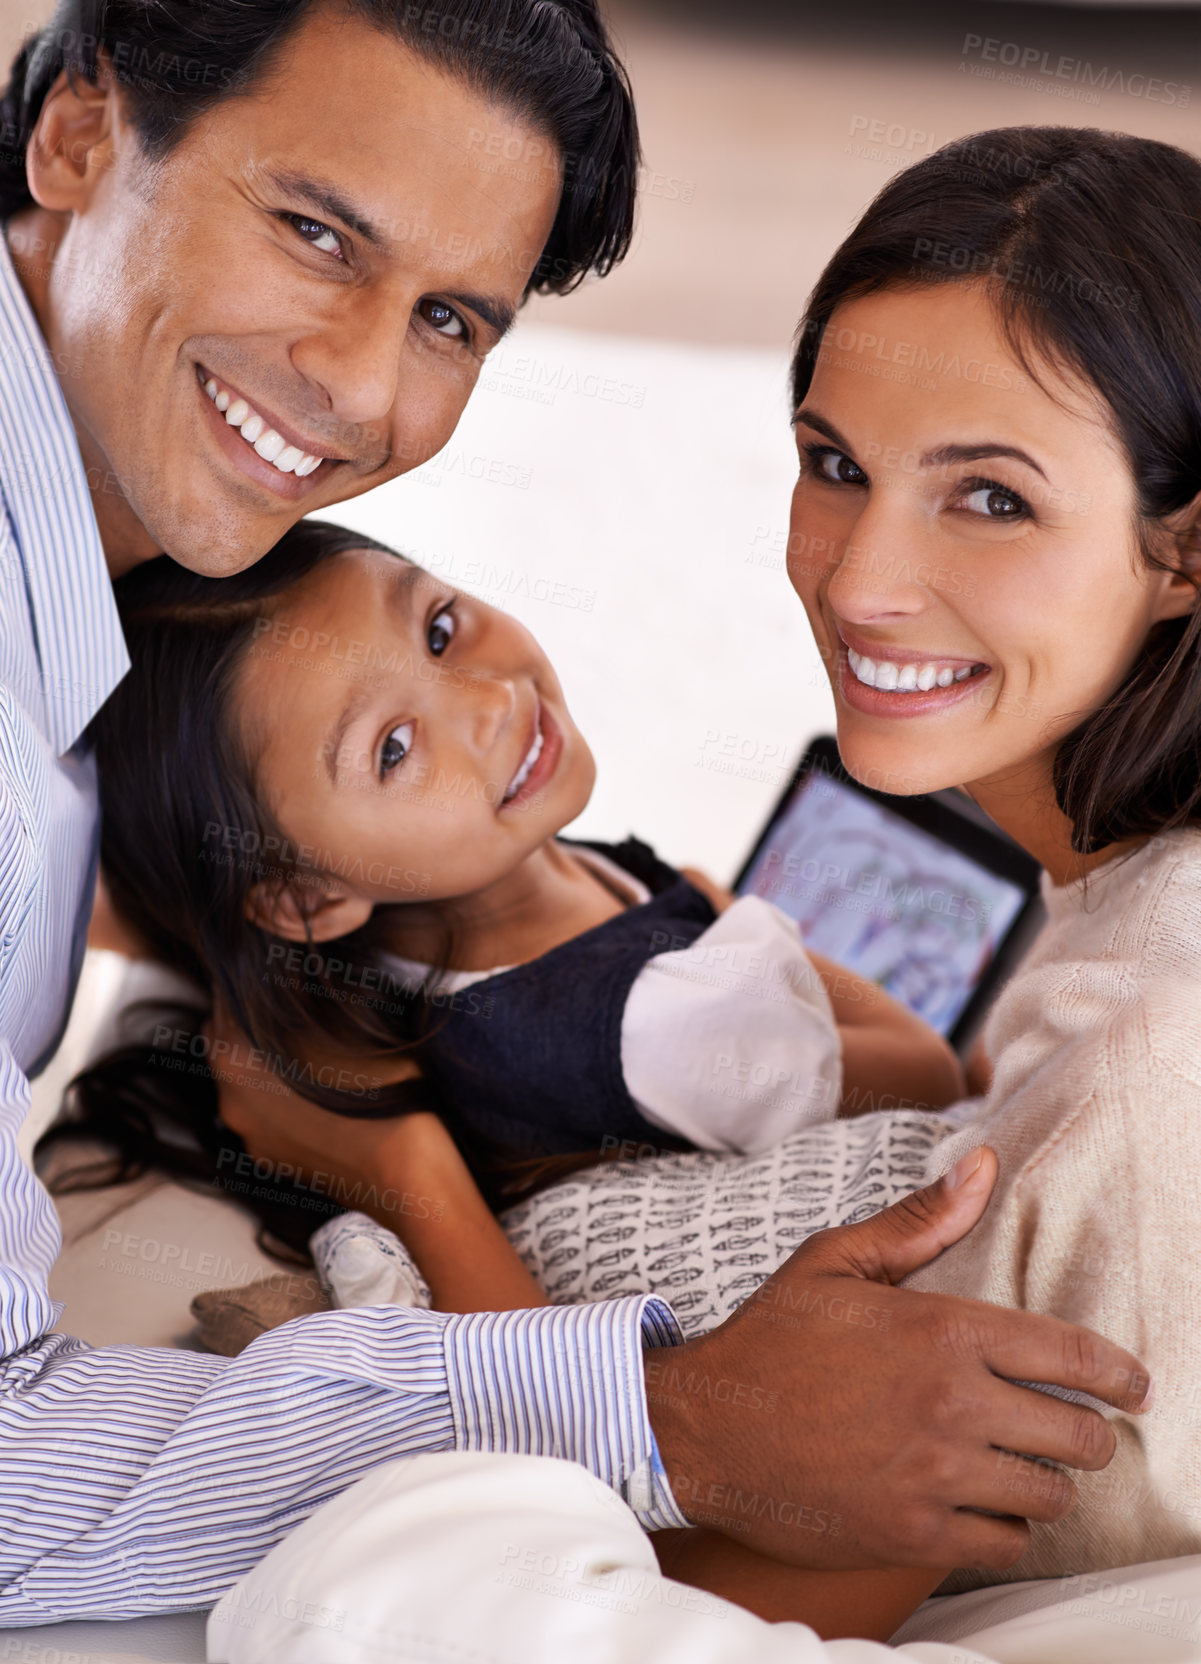 Buy stock photo Cropped portrait of an affectionate young family sharing a digital tablet